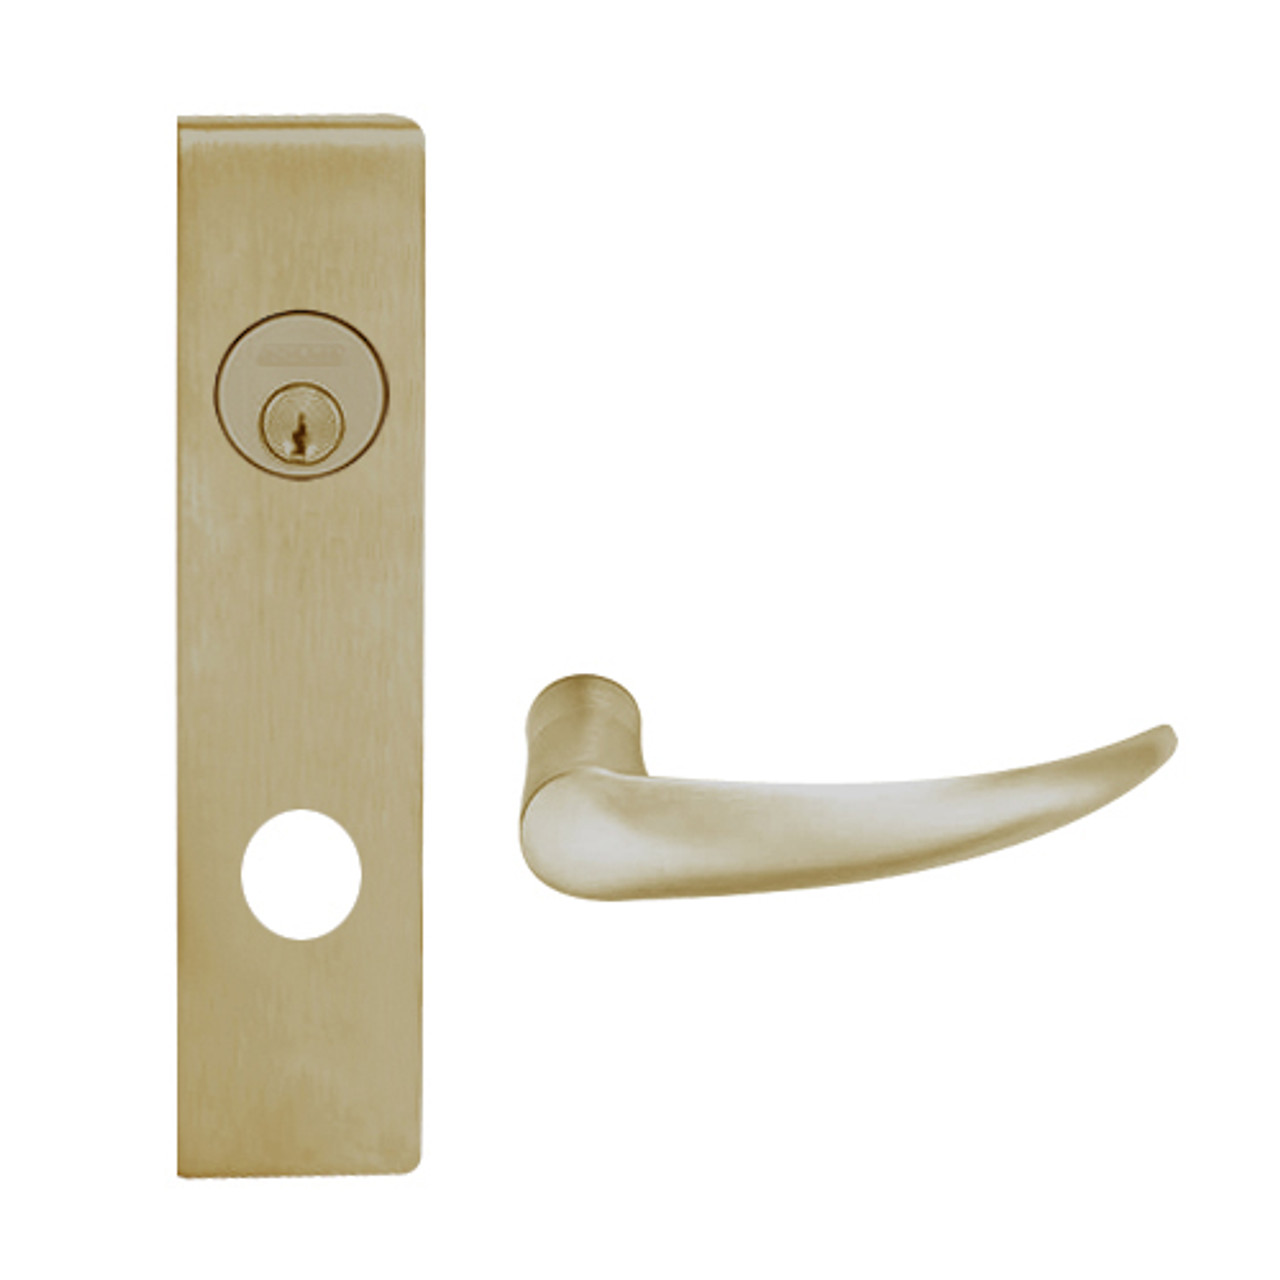 L9453L-OME-L-612 Schlage L Series Less Cylinder Entrance with Deadbolt Commercial Mortise Lock with Omega Lever Design in Satin Bronze